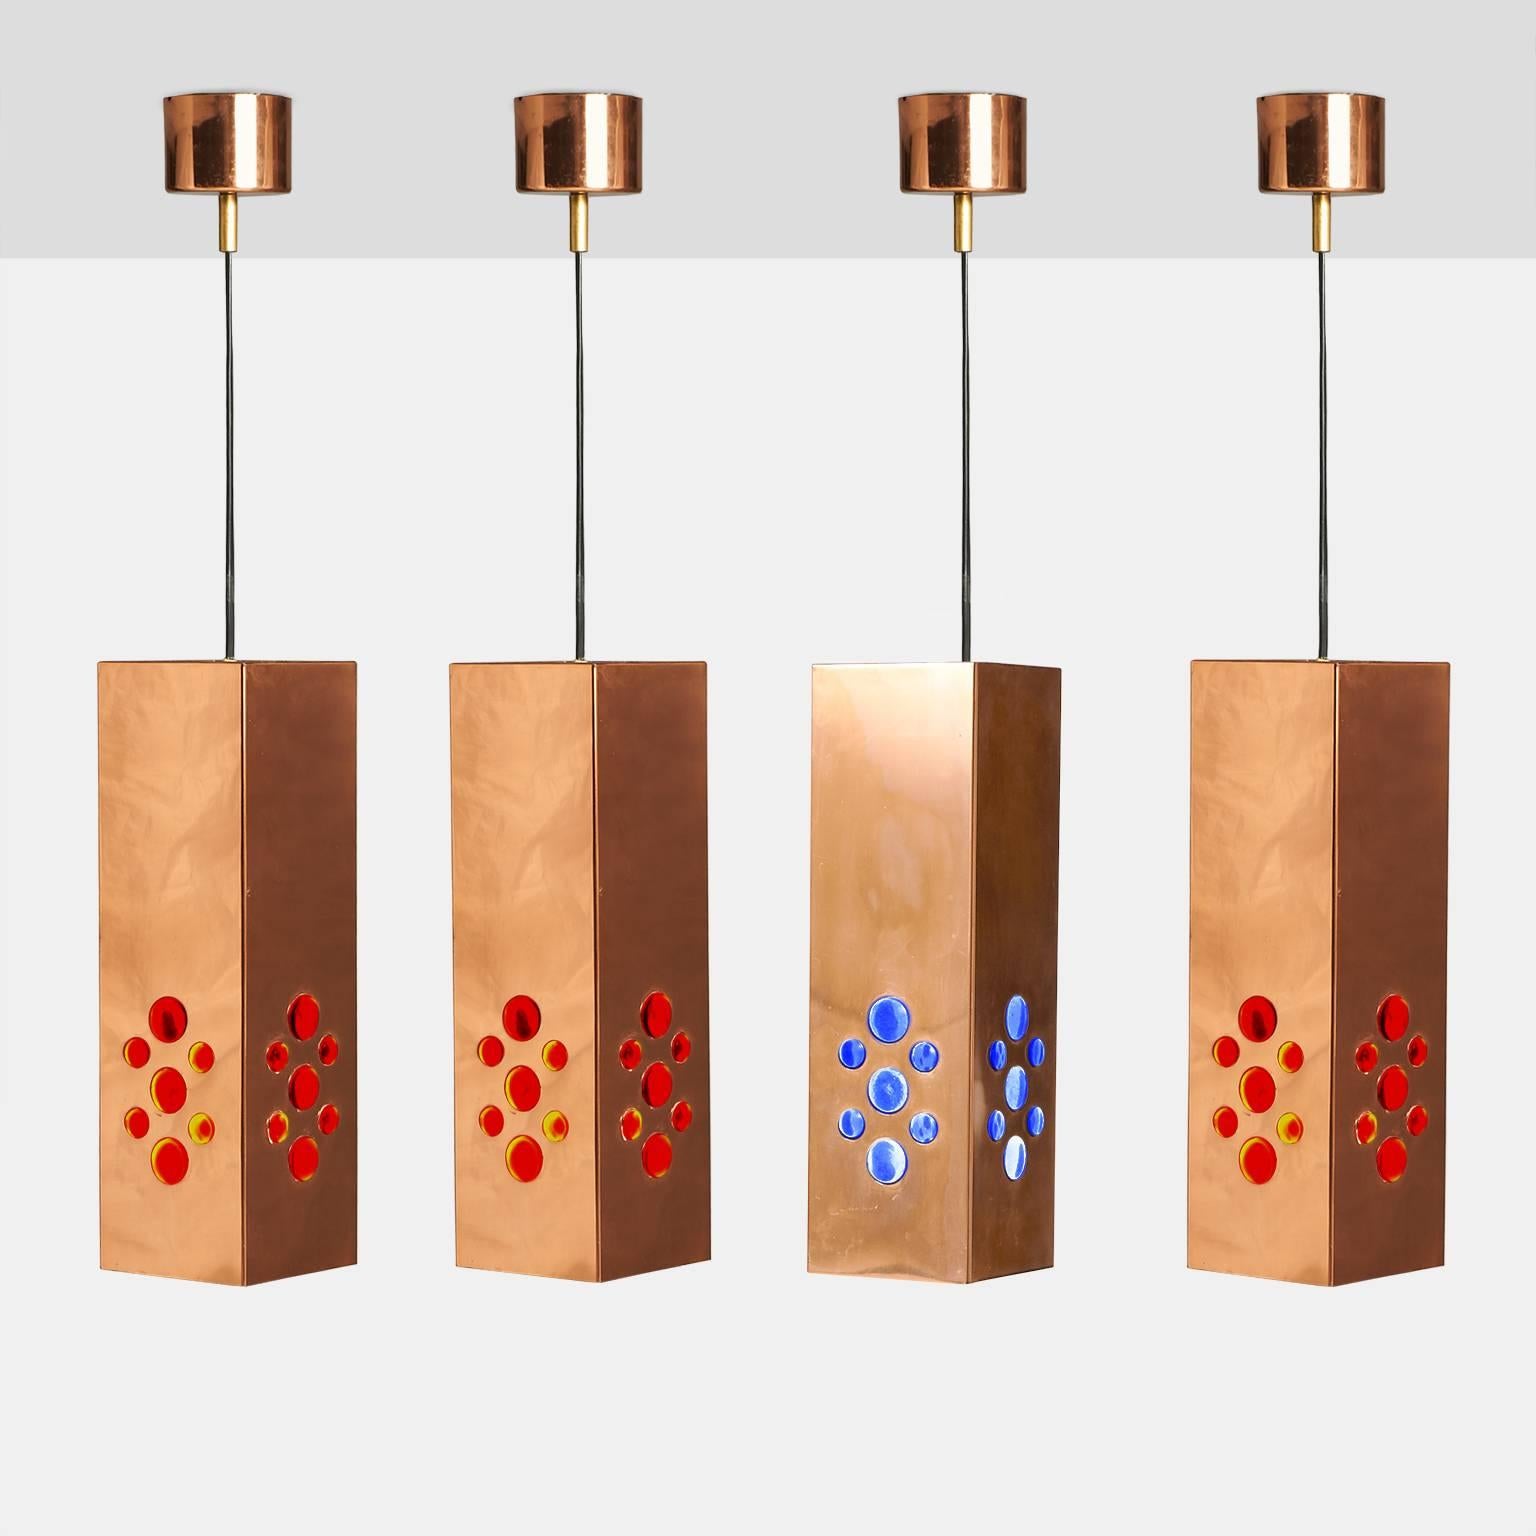 A set of four copper pendants with inset glass beads of red and blue designed by Hans Agne Jakobssen for for Markaryd. Each pendant has a single socket where the light reflects down and through the glass bead.

Price is for all 4 pendants.